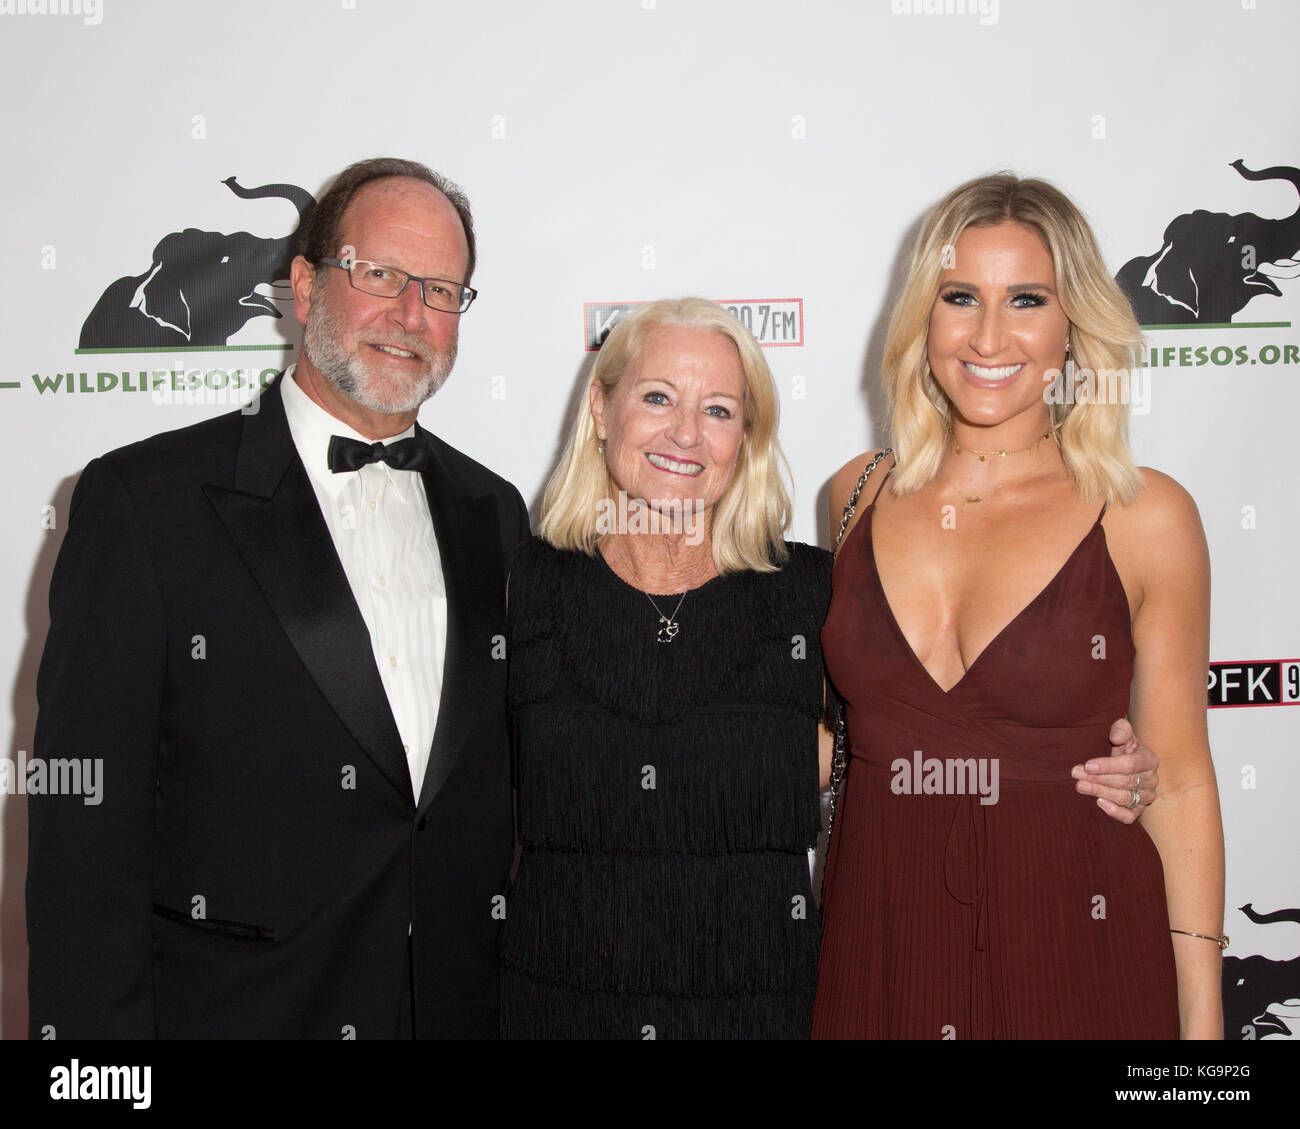 Los Angeles, California, USA. 4th November, 2017. Doug Stoll, Patty  Shenker, honoree and co-founder of the Animal Advocacy Museum, and Julia  Stoll attending Tusk After Dusk: Night of 1000 Elephants benefit for